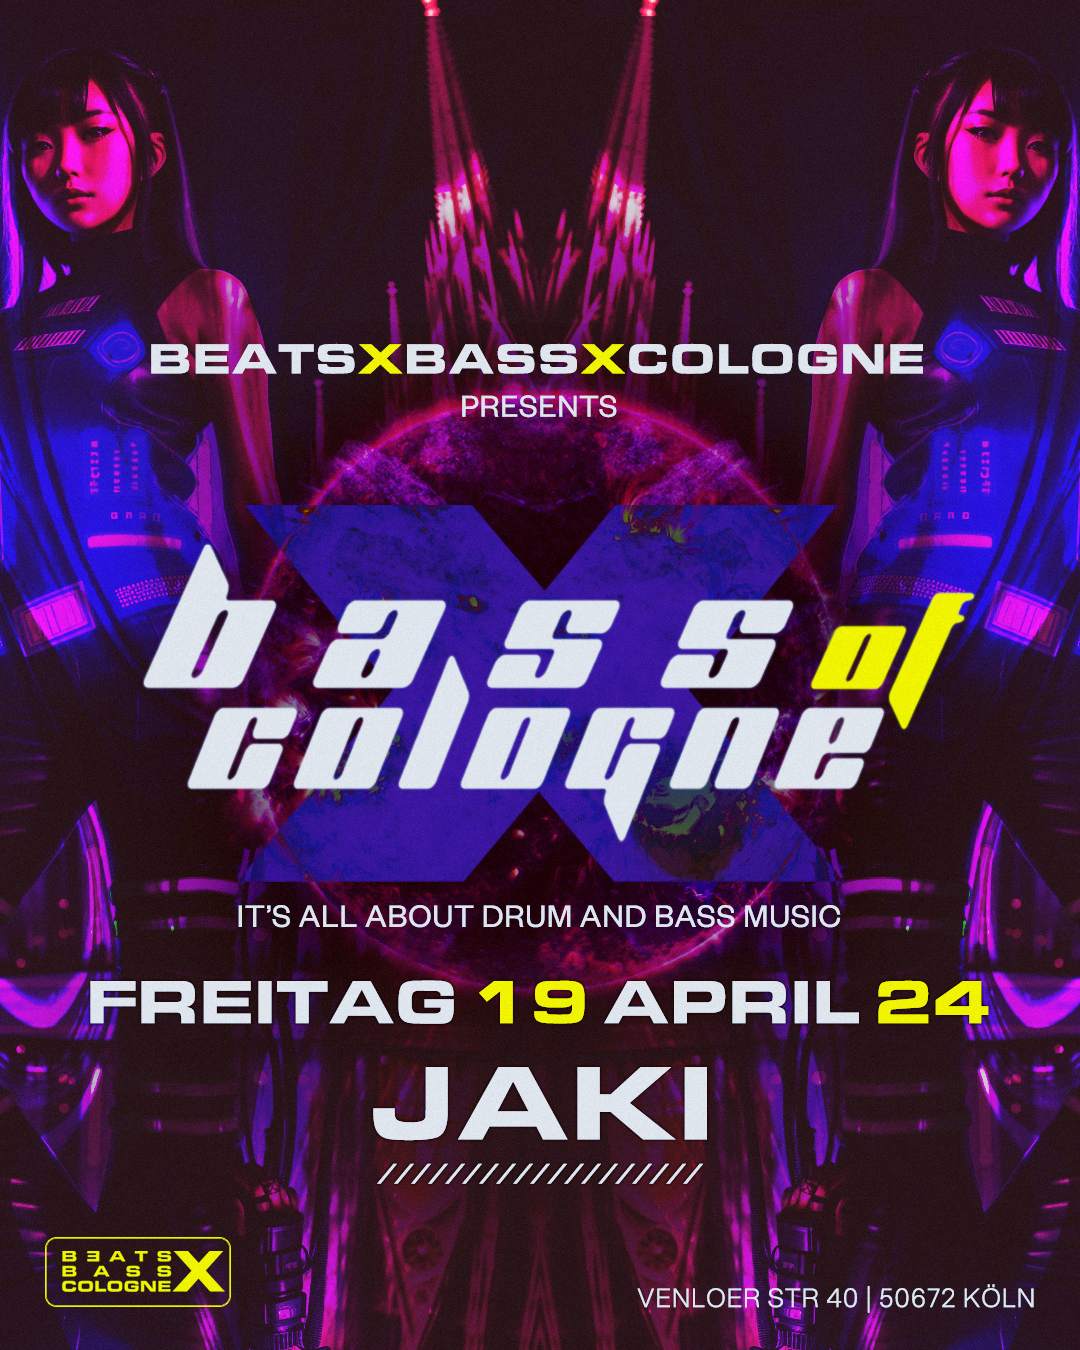 Beats x Bass x Cologne pres. BASS OF COLOGNE - フライヤー表